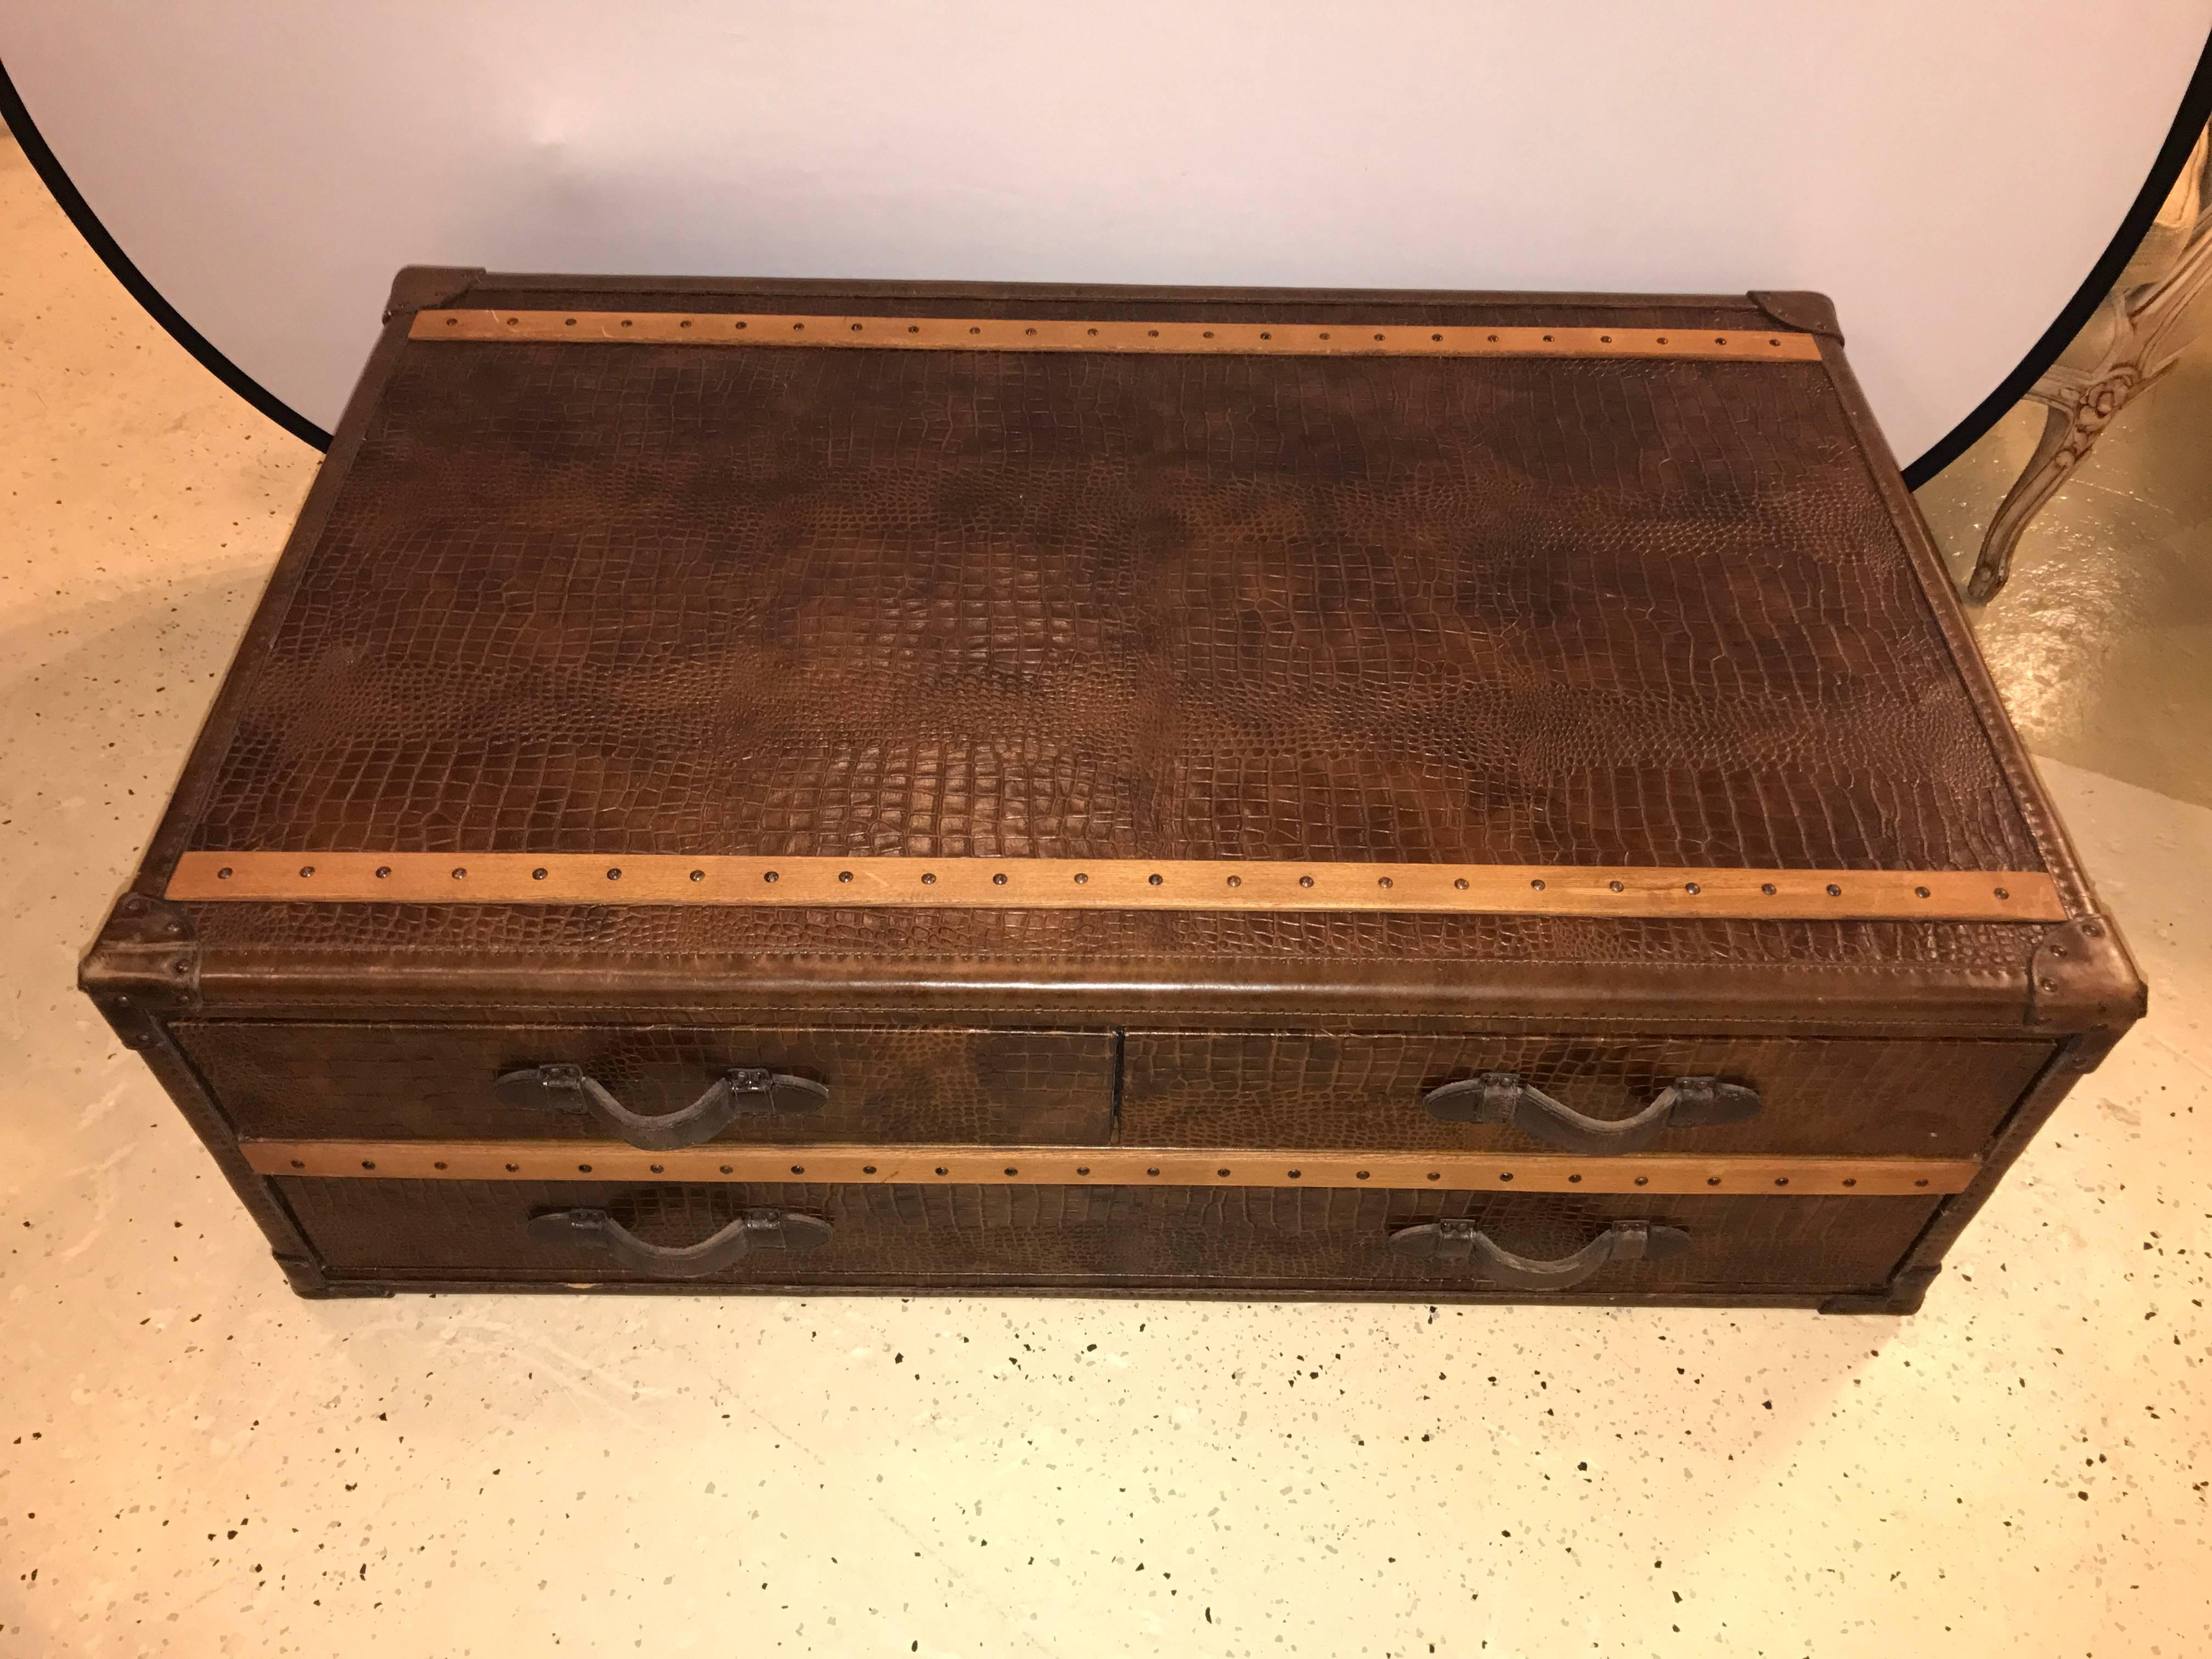 Leather alligator style oak trimmed trunk or coffee table. This fine coffee table has two upper drawers over one larger lower drawer all with leather strap pulls. The trunk itself with fine oak trim. Very sleek and stylish.
  